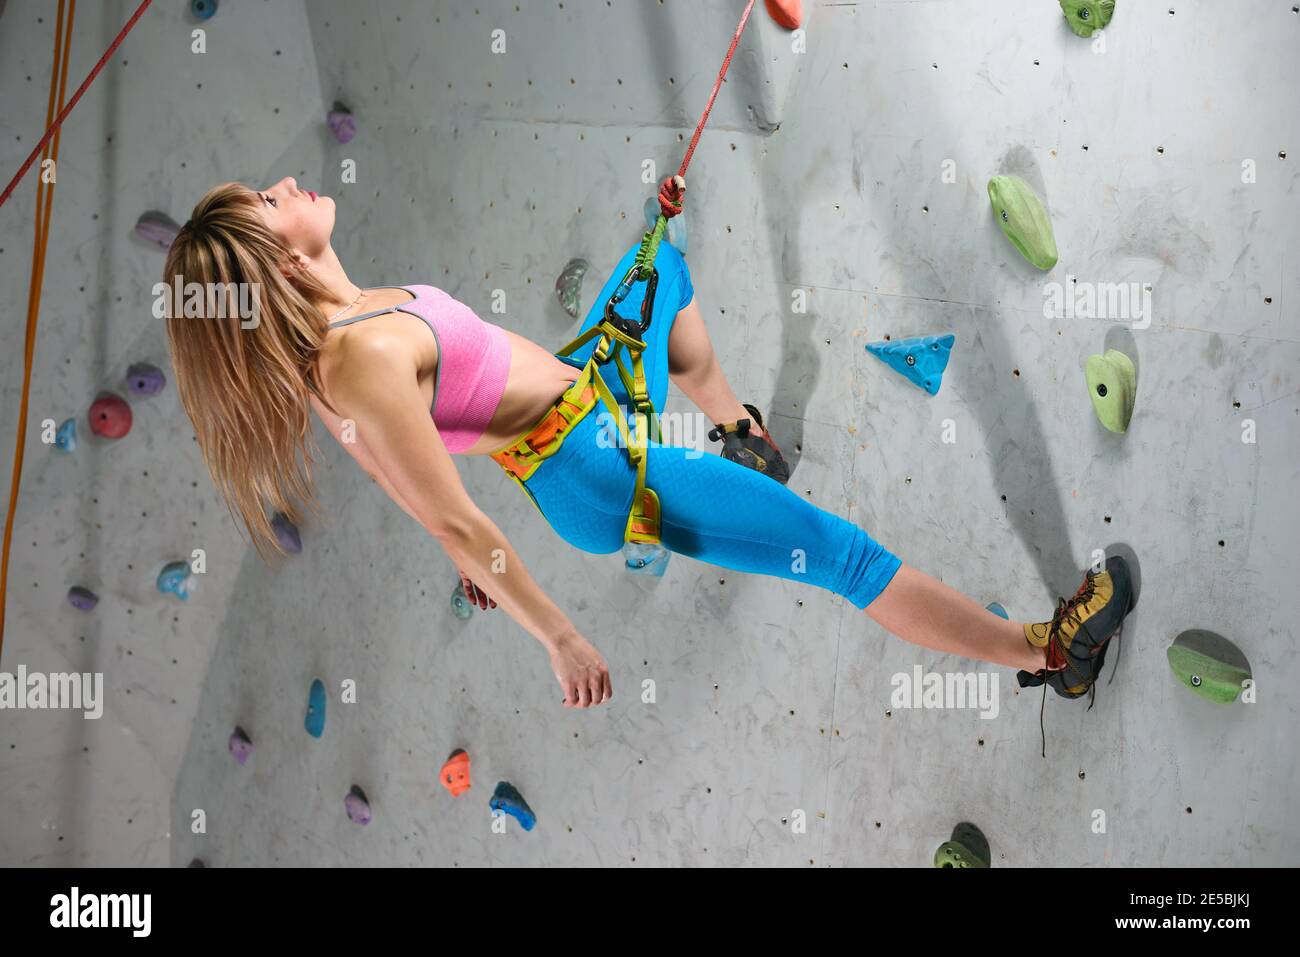 Beautiful young woman in black outfit looking at camera climbing on  practical wall in gym, bouldering, extreme sport, rock-climbing concept  Stock Photo - Alamy